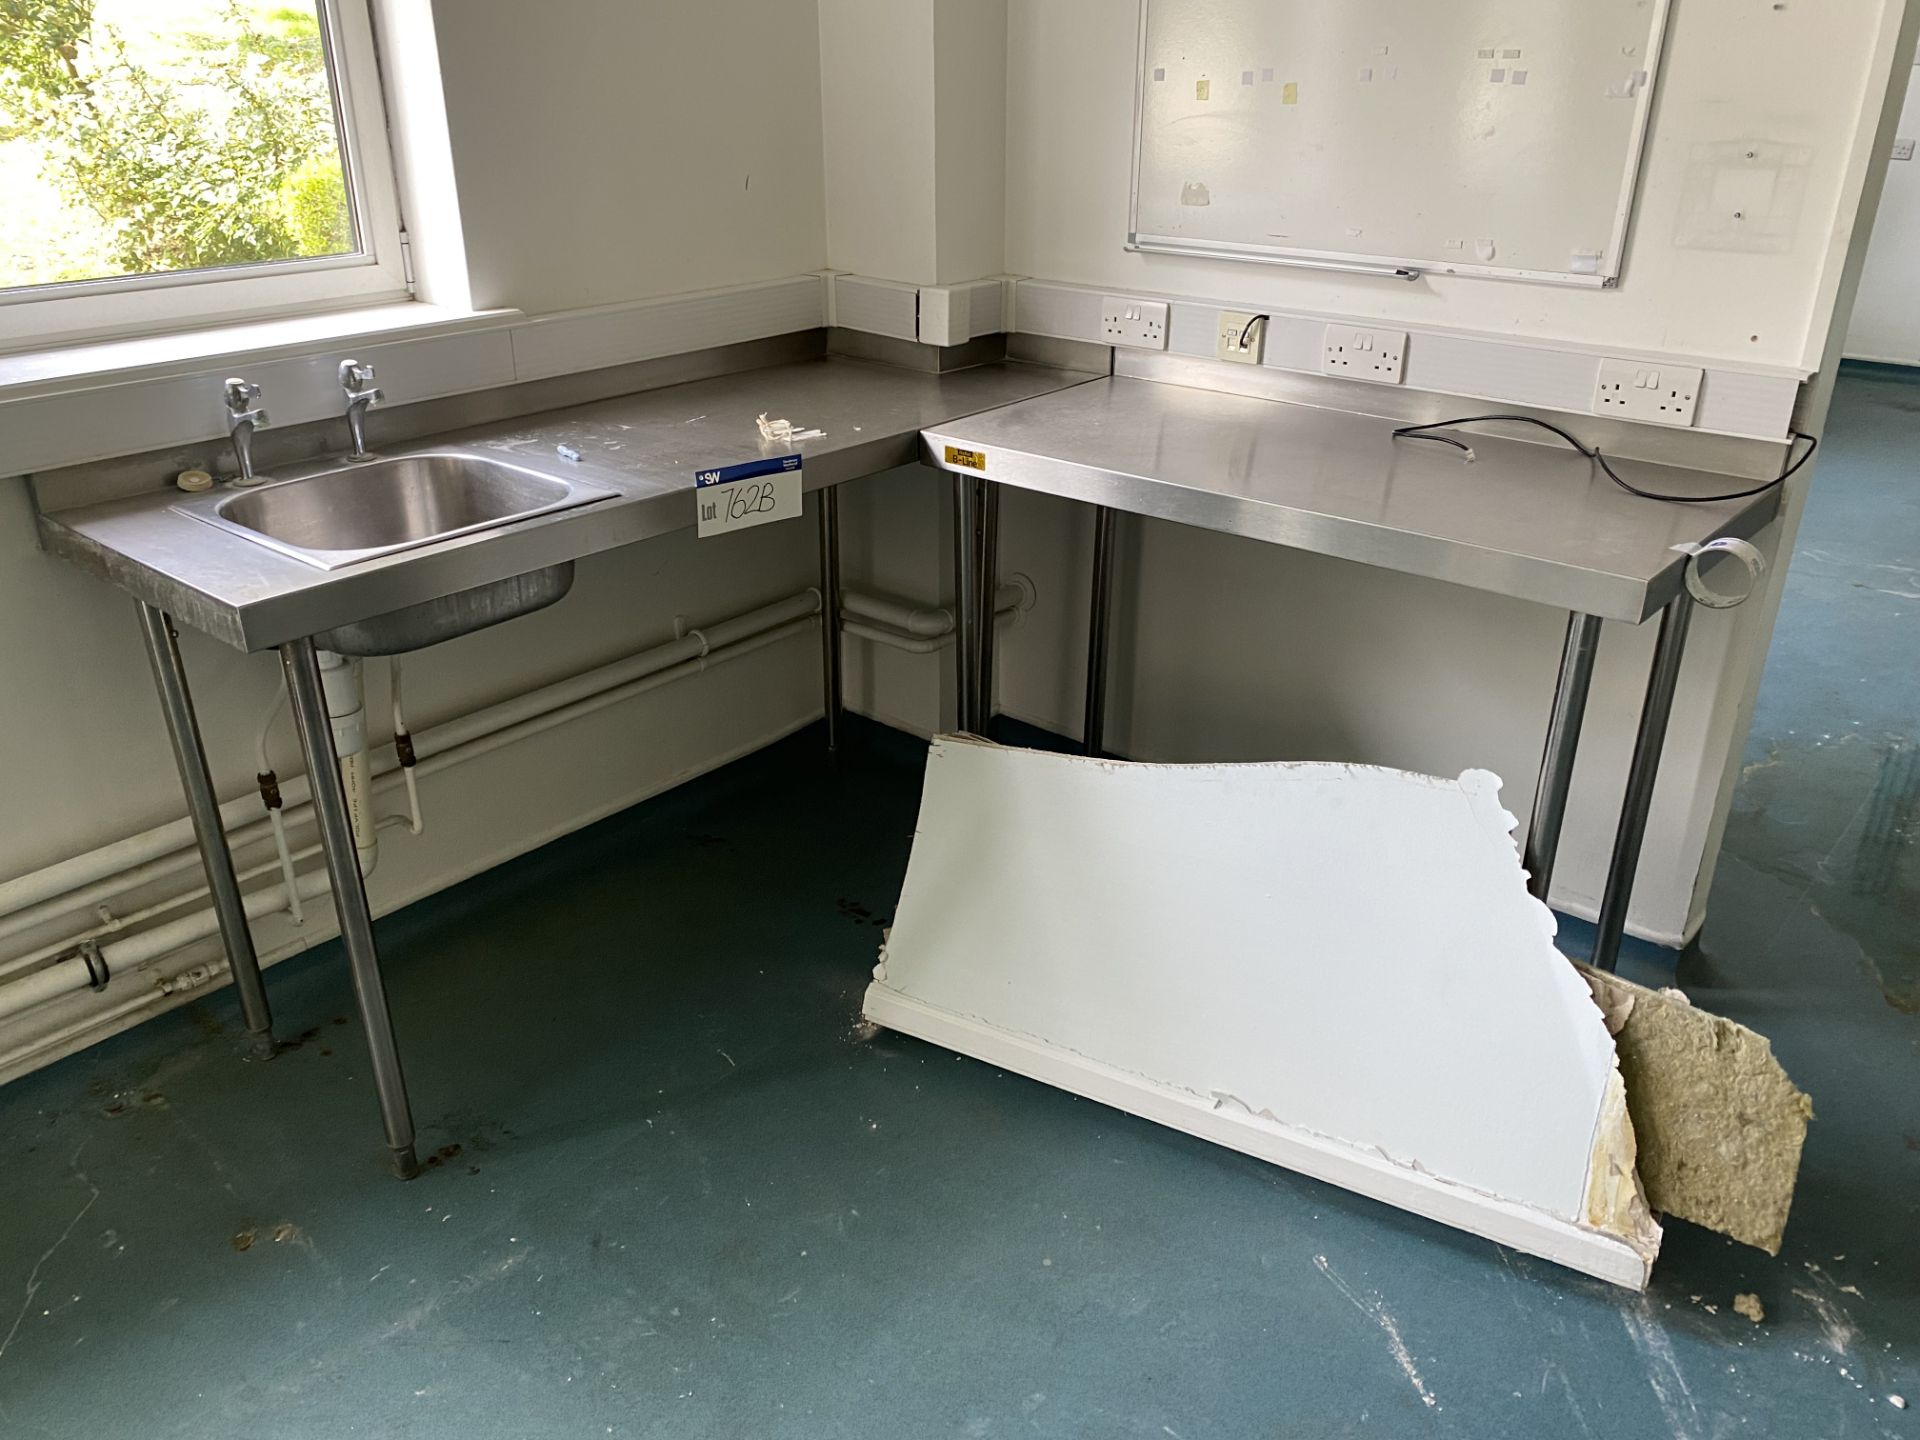 L-Shaped Stainless Steel Sink Unit, approx. 1.8m x 1.8m overallPlease read the following important